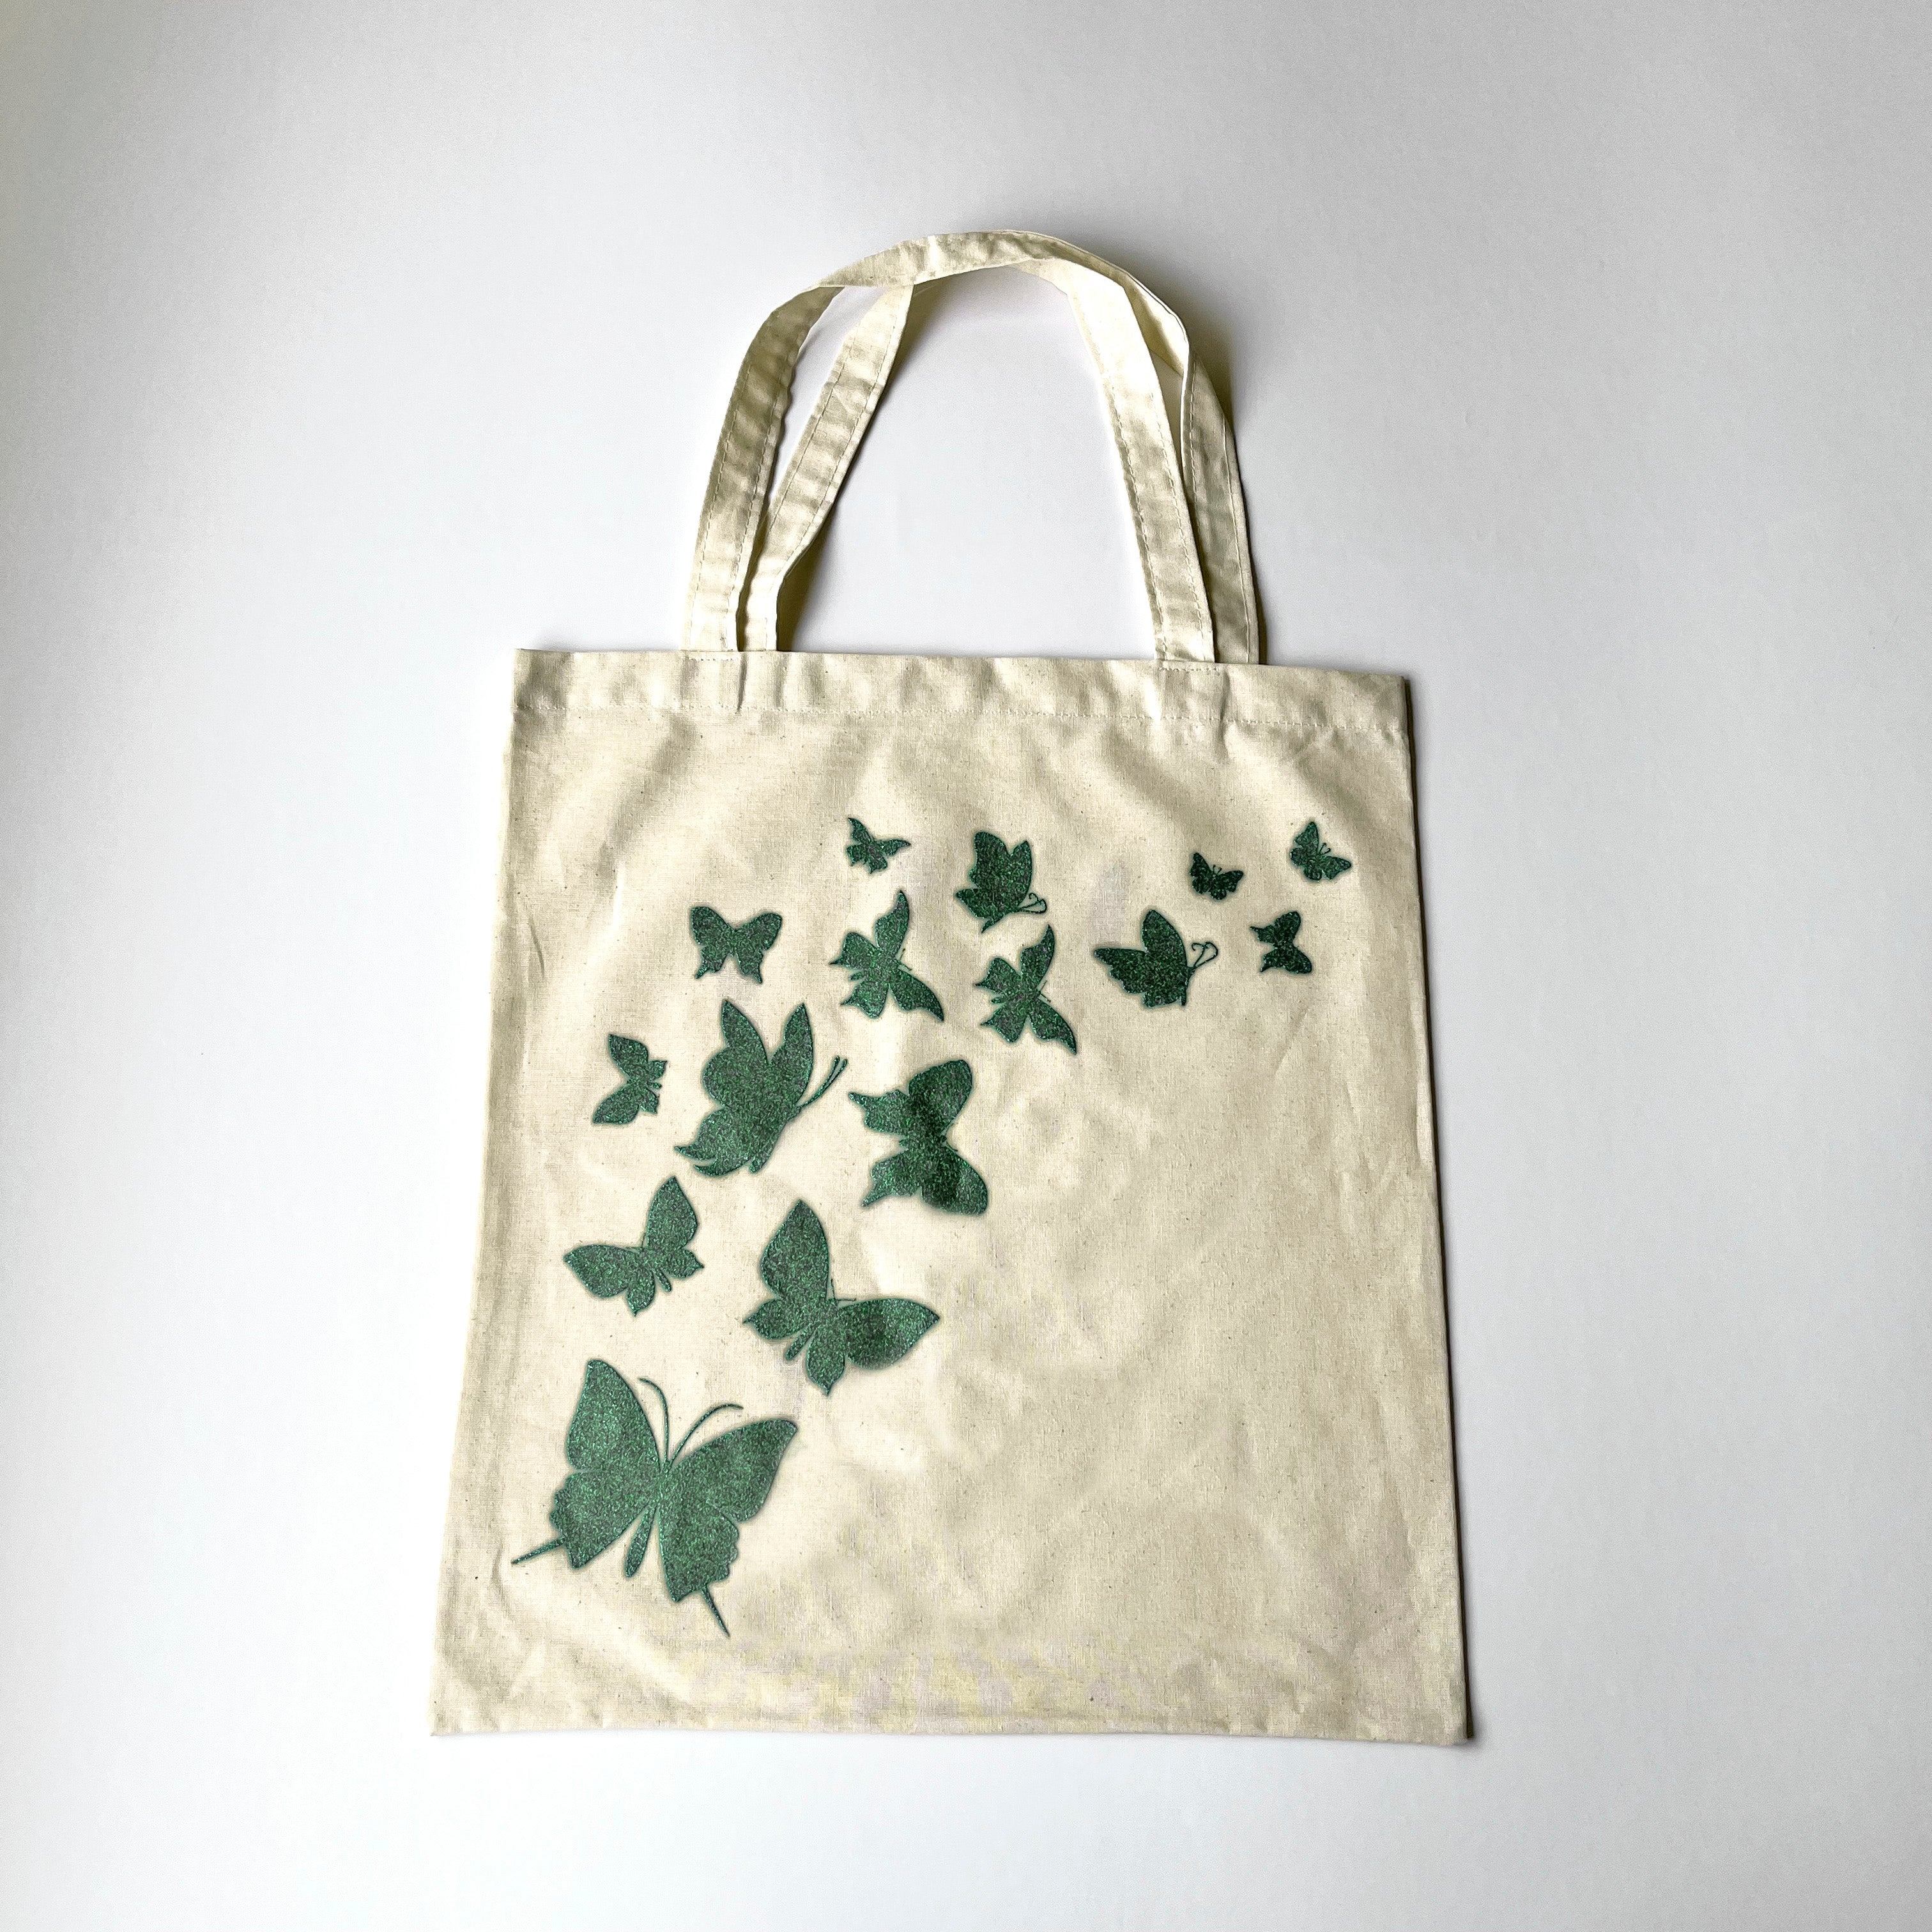 Cotton shopping bag - silk-screen printing on a predefined blue area